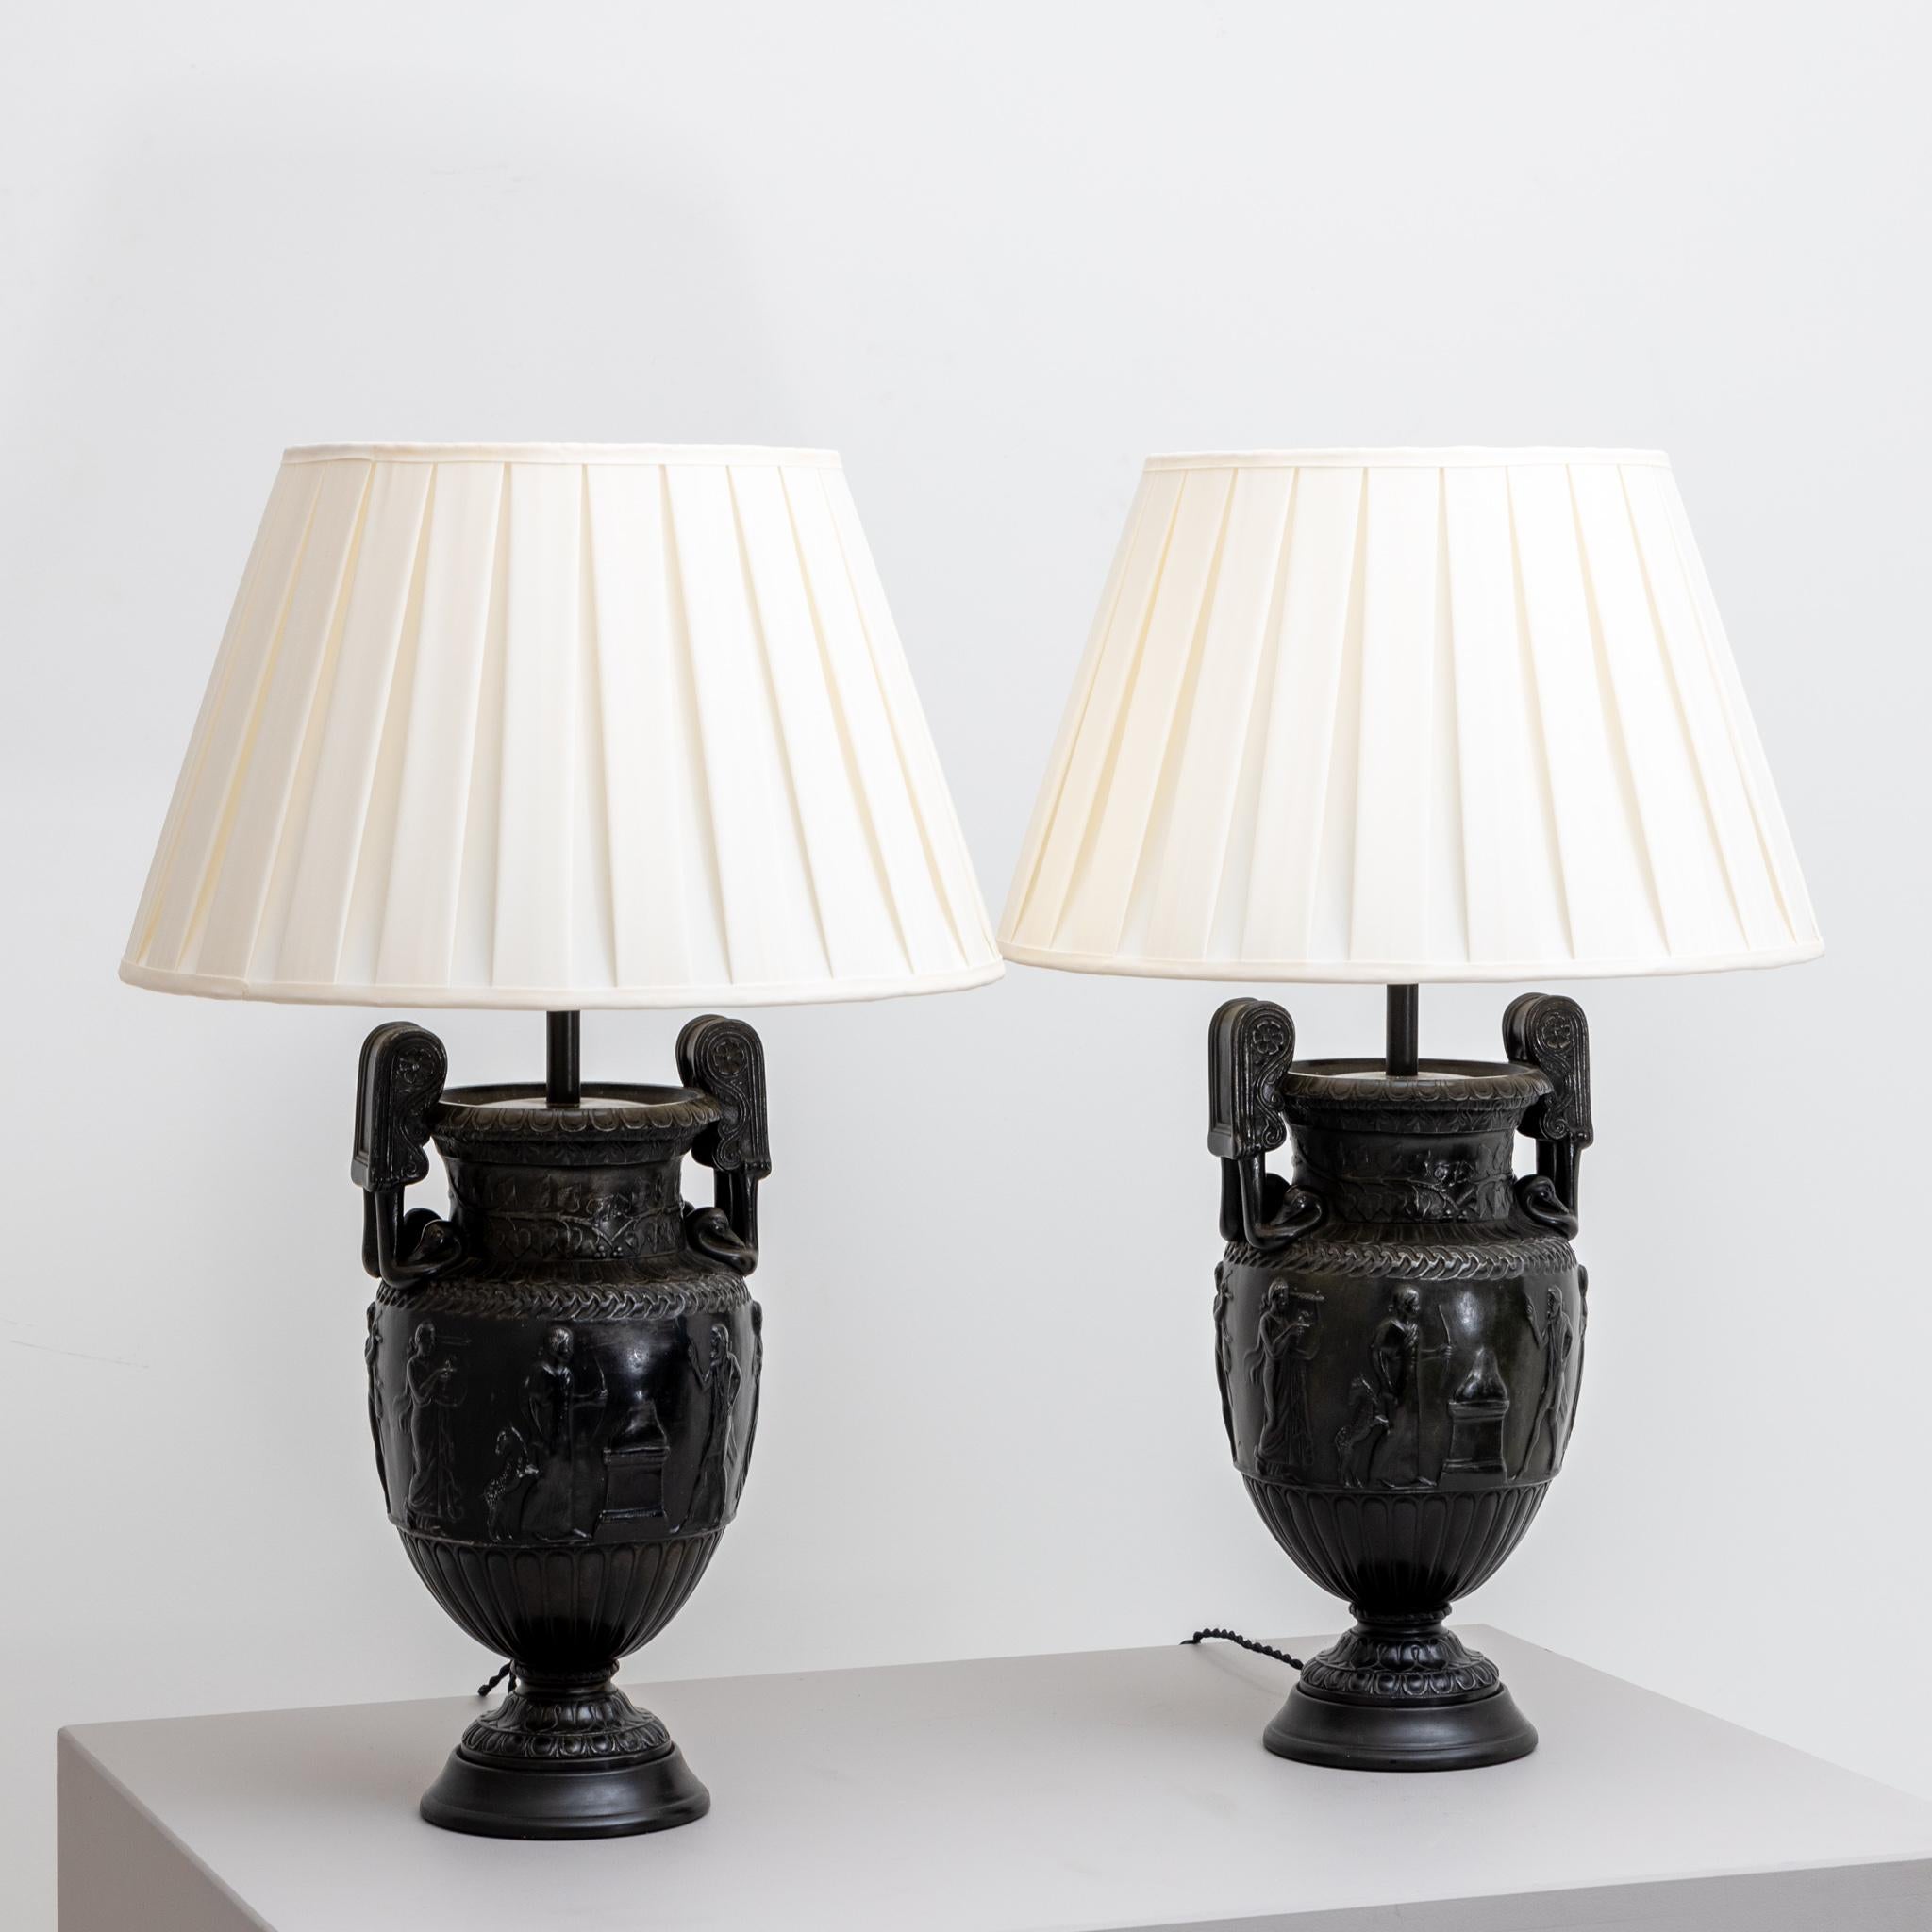 Pair of Townley spelter vases as lamp bases with white fabric lampshades.